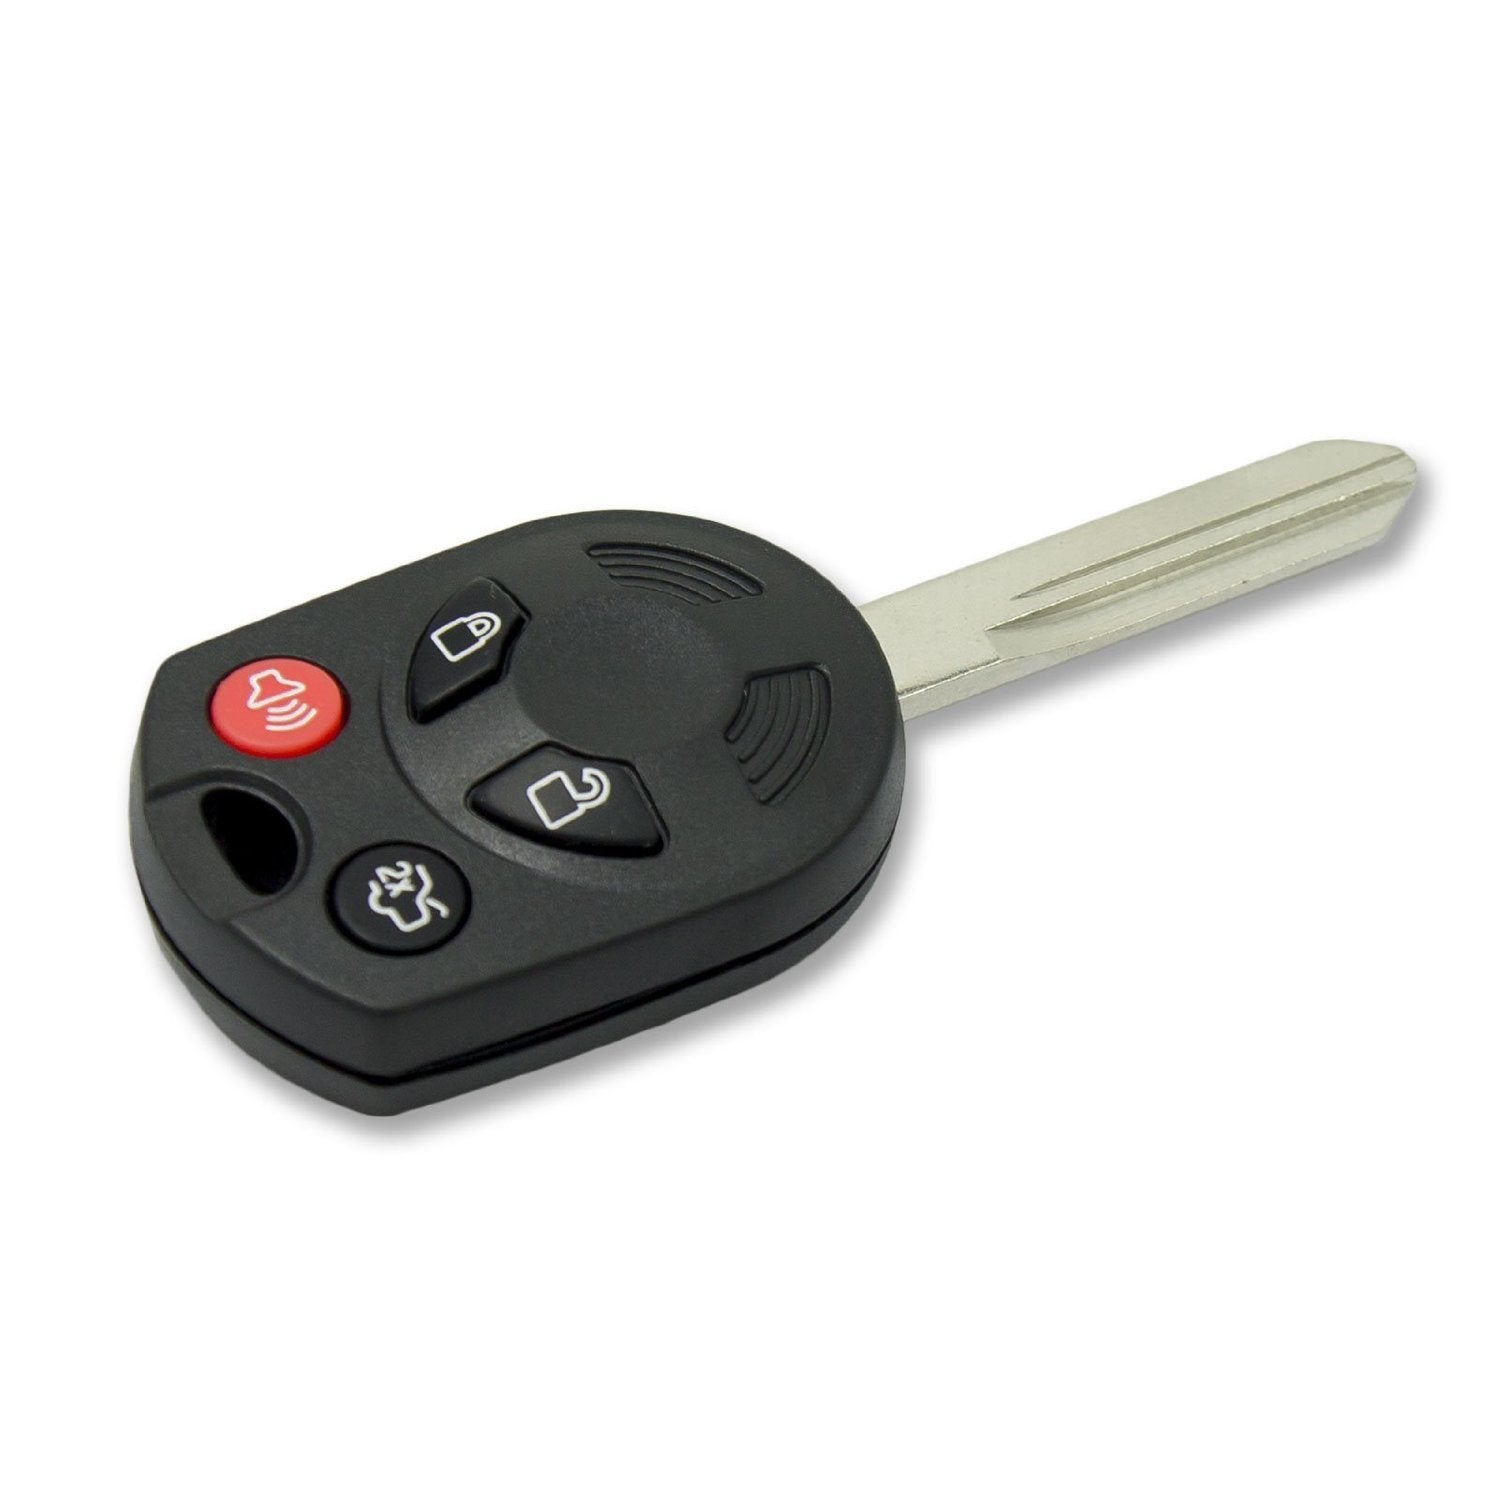 2006-2012 Ford / Mercury / Lincoln / 4-Button Remote Head Key / PN: 164-R7040 / OUCD6000022 / H75 / Chip 80 Bit (RHK-FD-401) - UHS Hardware